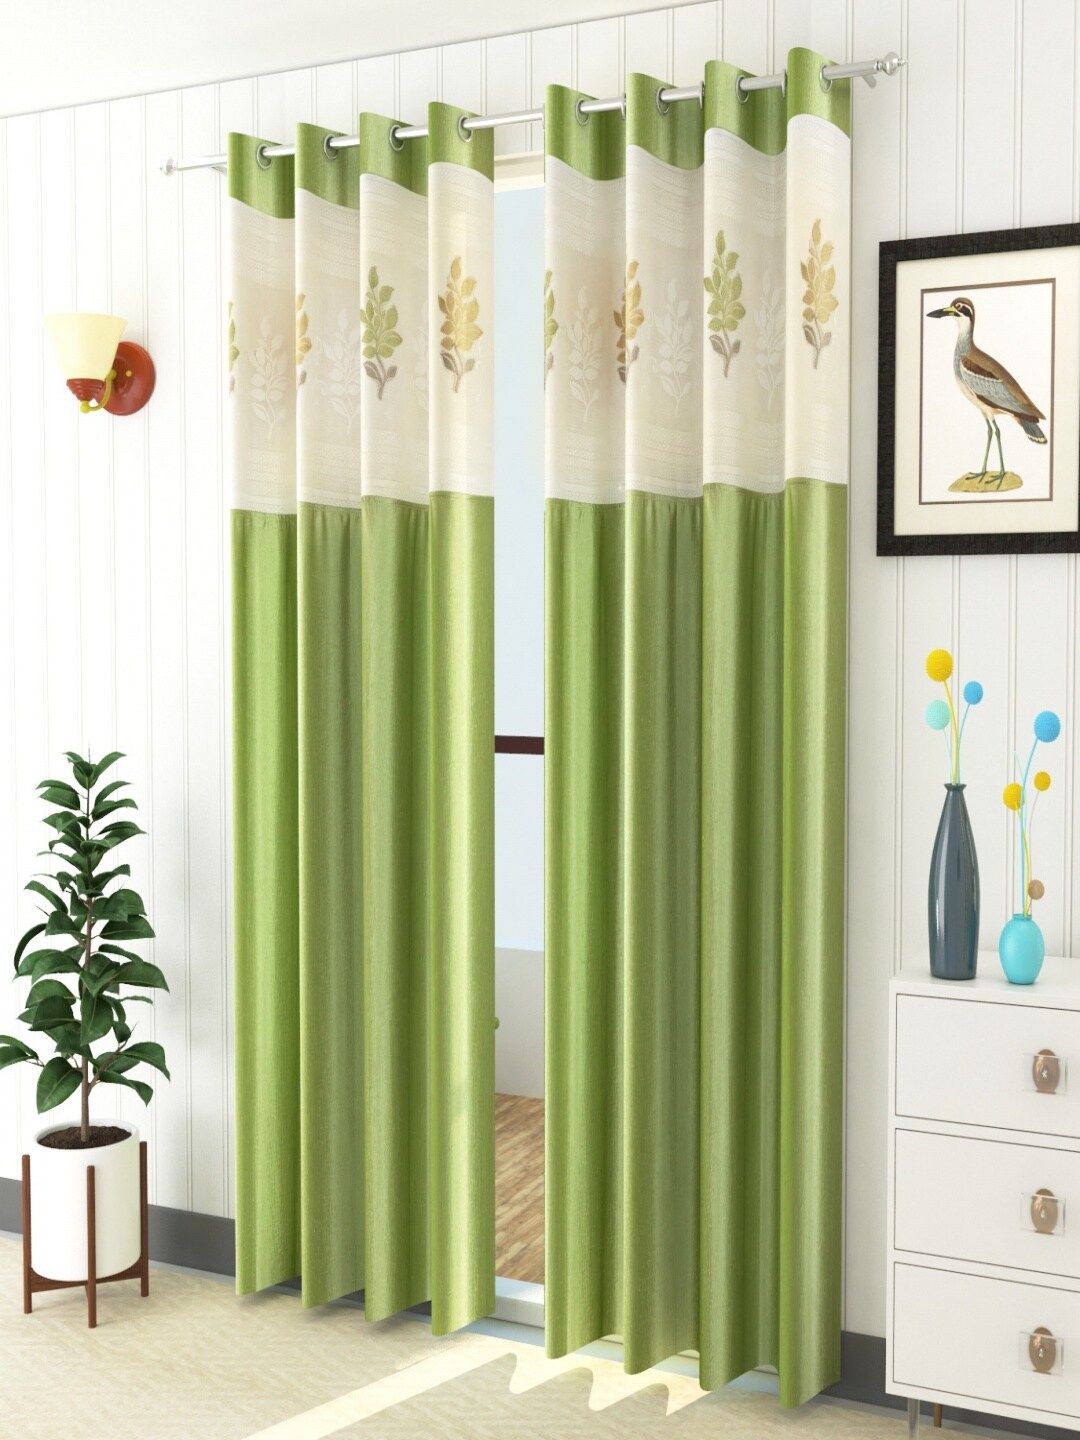 Homefab India Set of 2 Floral Green & White Printed Sheer Door Curtain Price in India